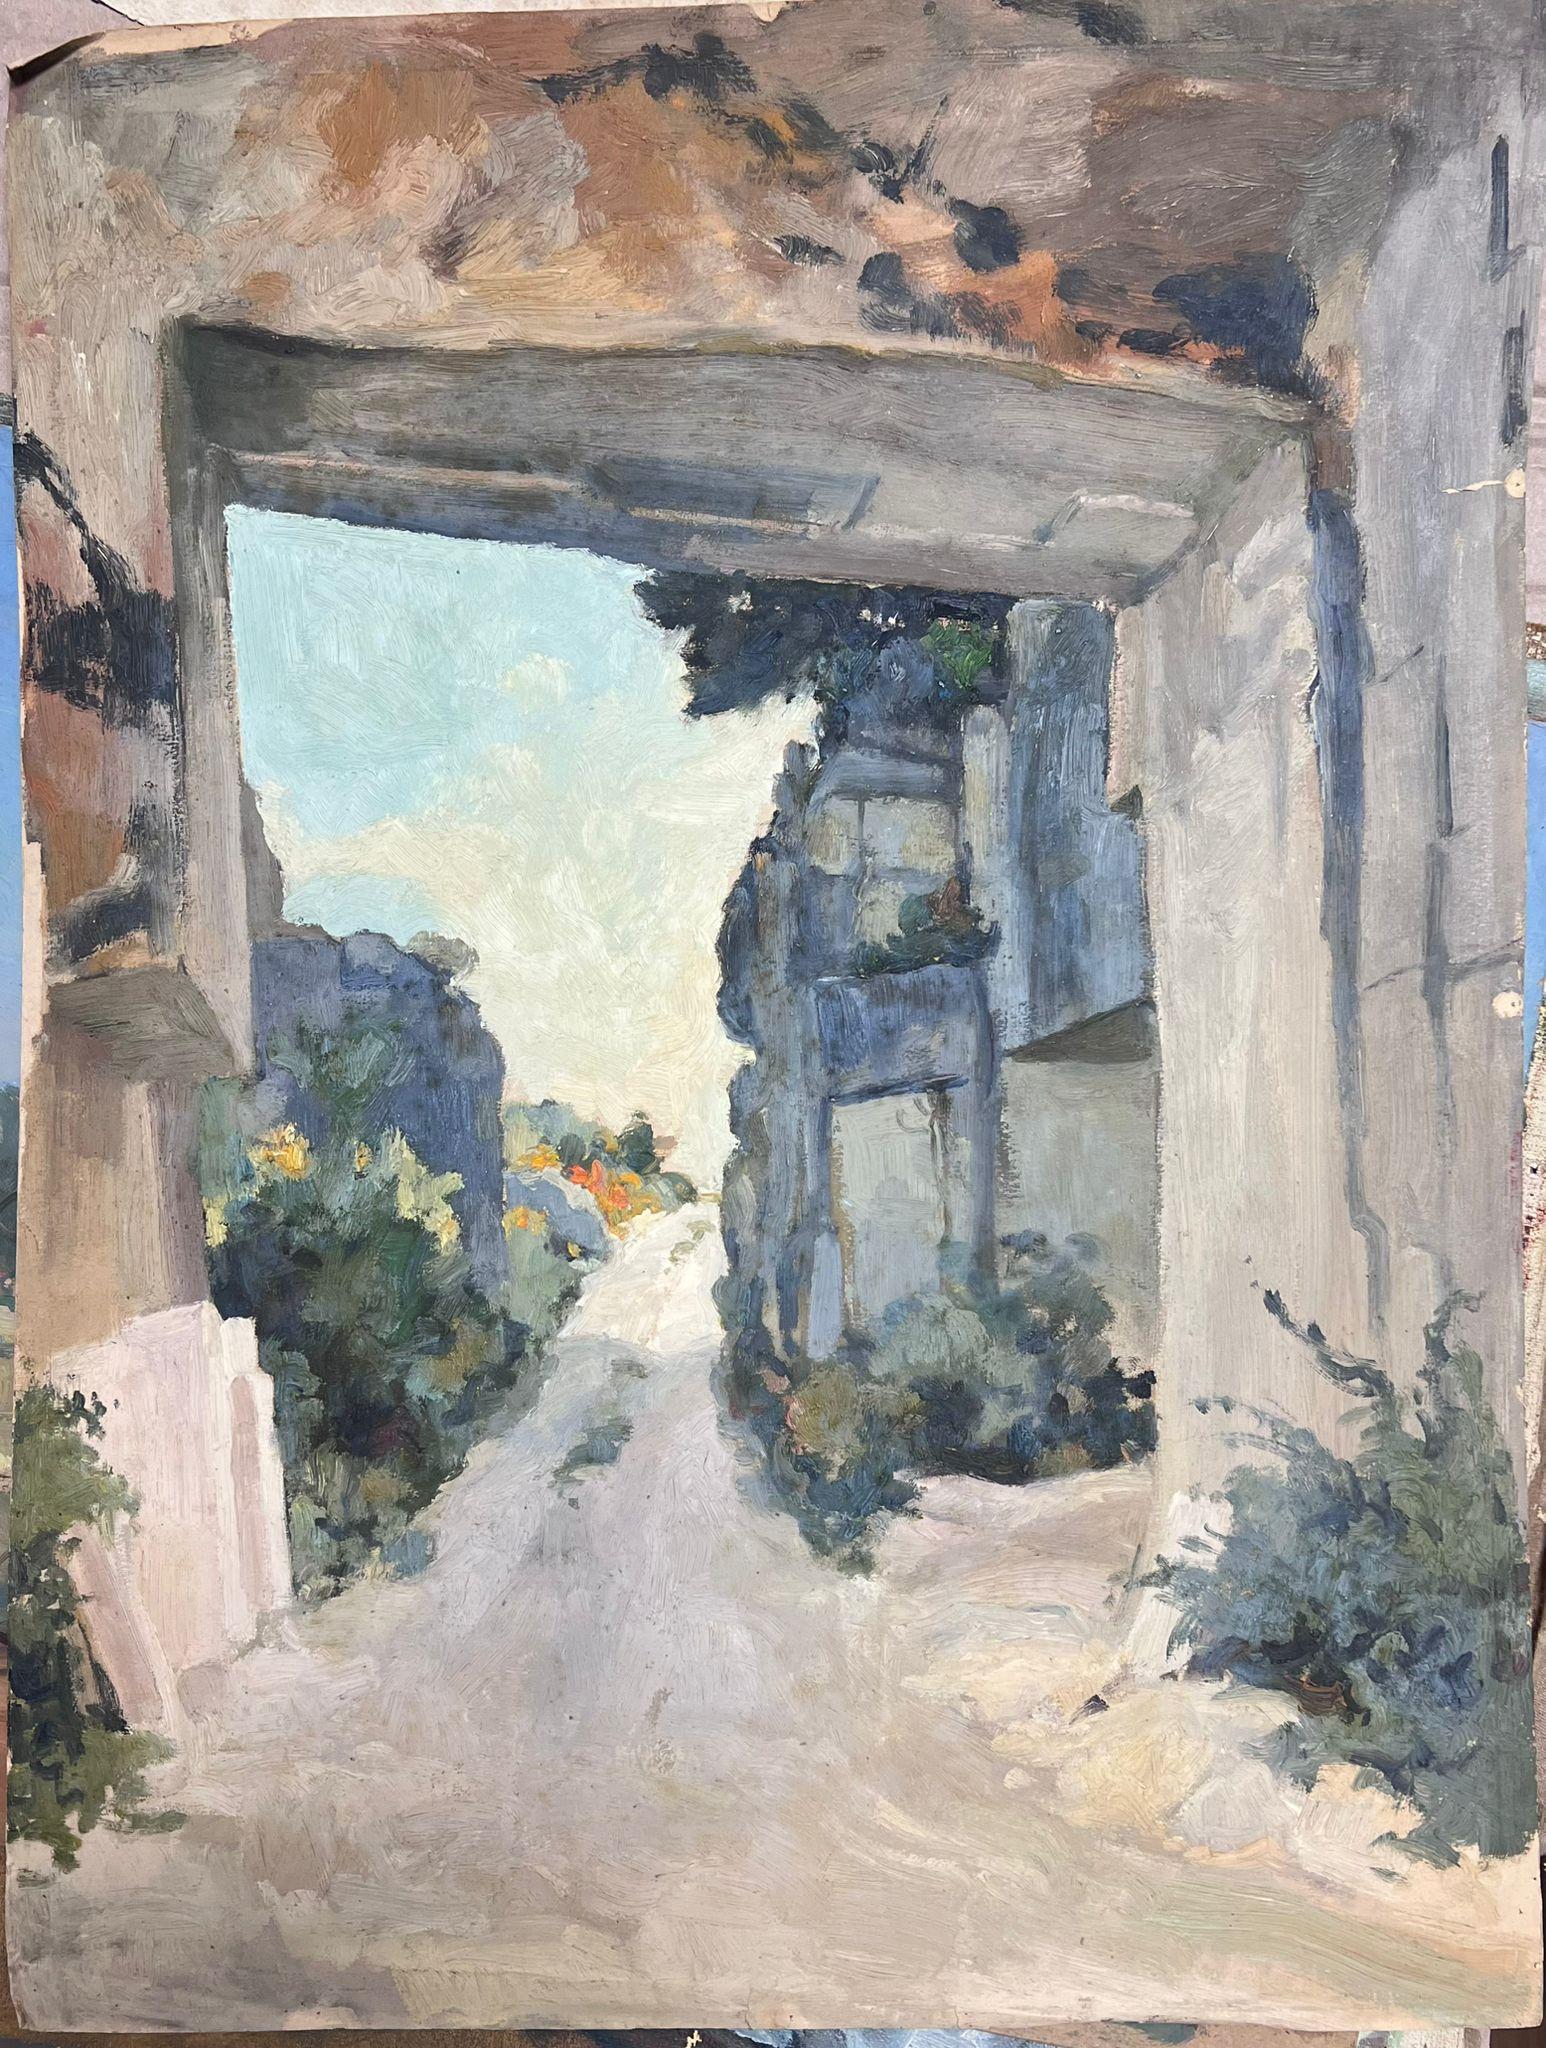 Jean La Forgue (French 1901-1975)
oil on card, unframed
painting: 25.75 x 19.75 inches
provenance: the artists estate, France
condition: very good and sound condition; there are minor age related marks and stains to the surface simply caused by the